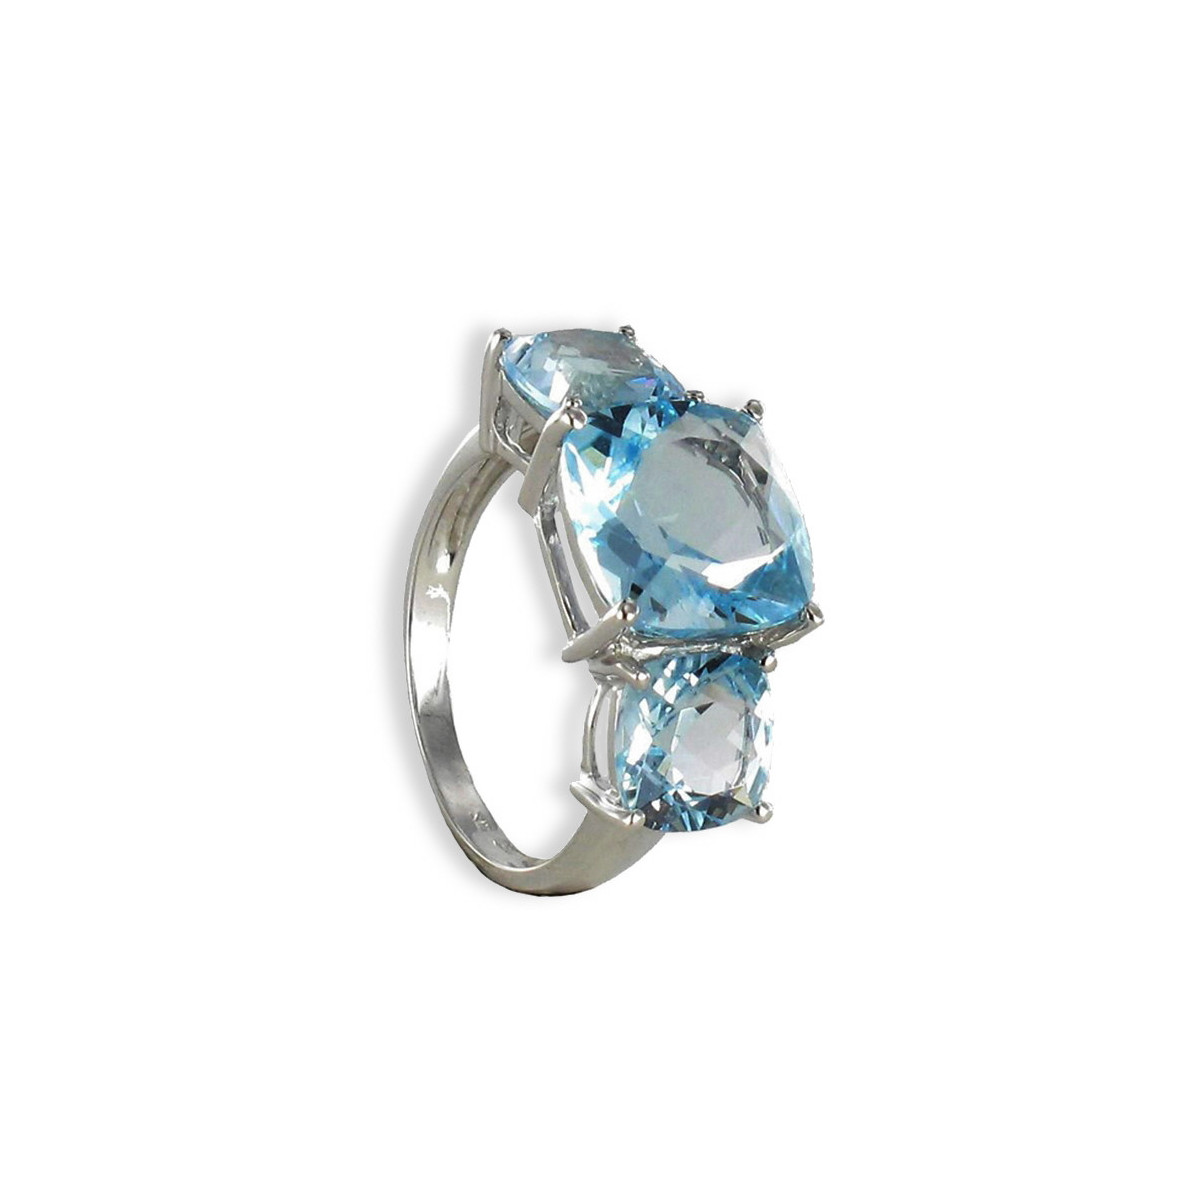 GOLD RING WITH 3 BLUE TOPAZ